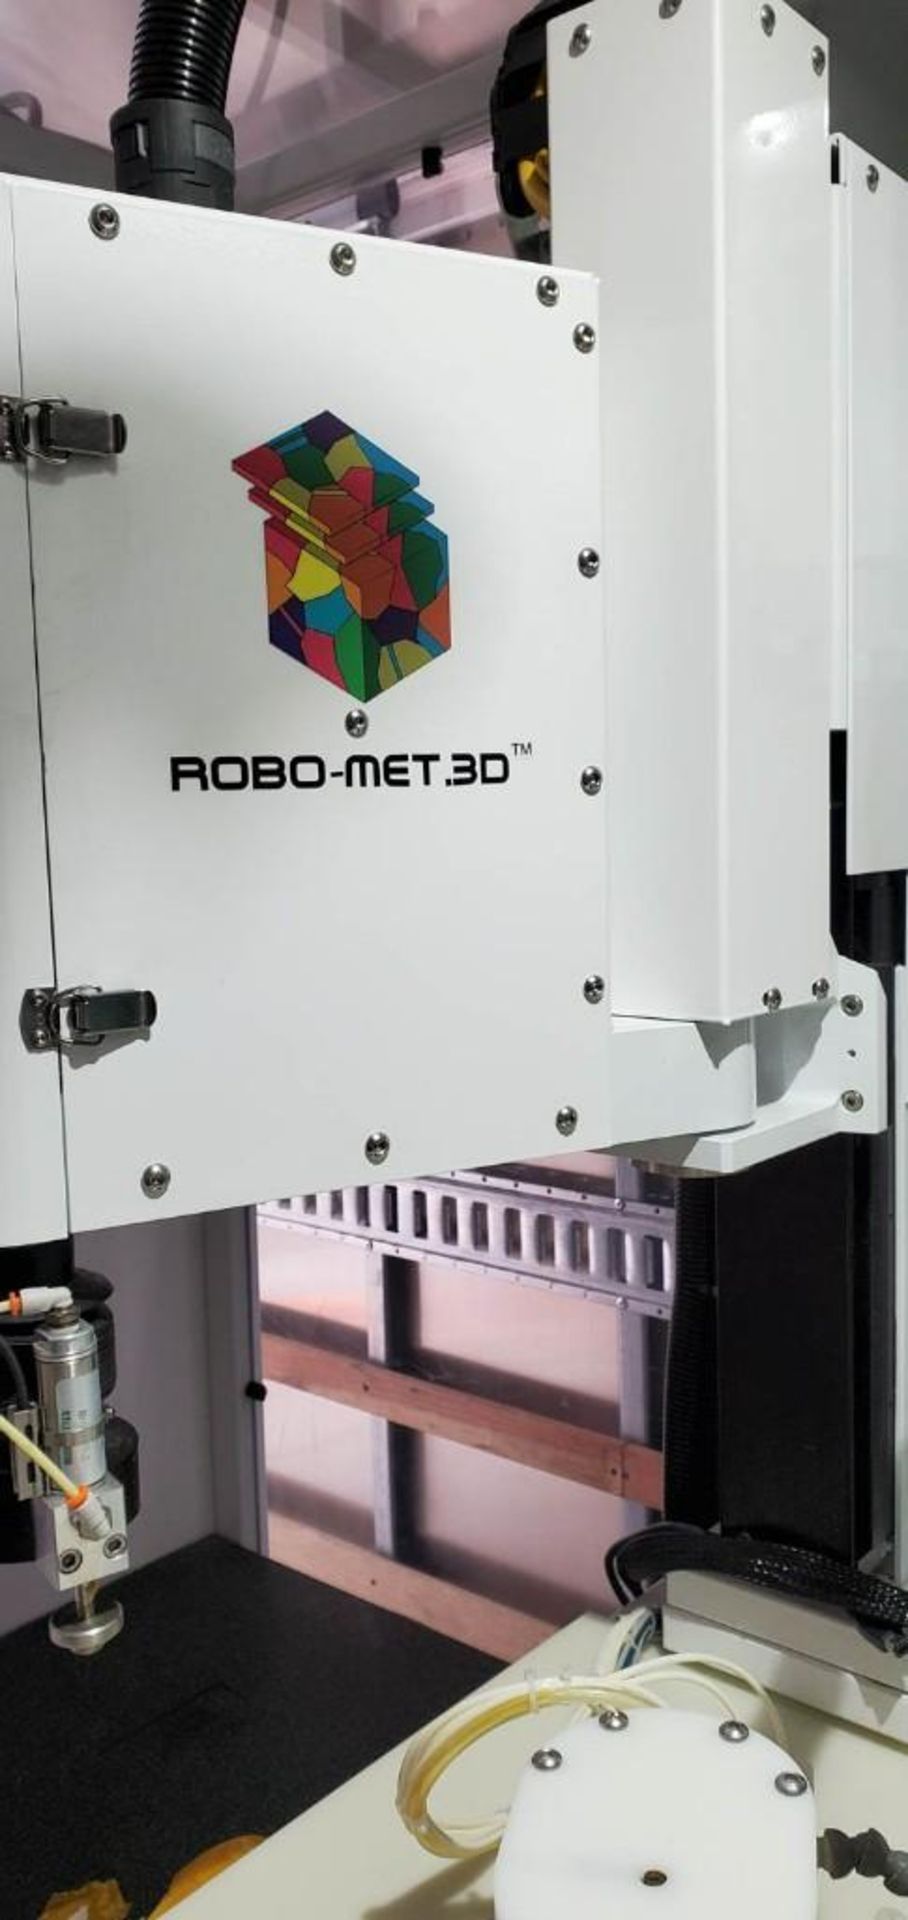 2013 UES Model Robomet 3D Automated Robotic Metallographic Preparation and 3D Photo System - Image 16 of 53